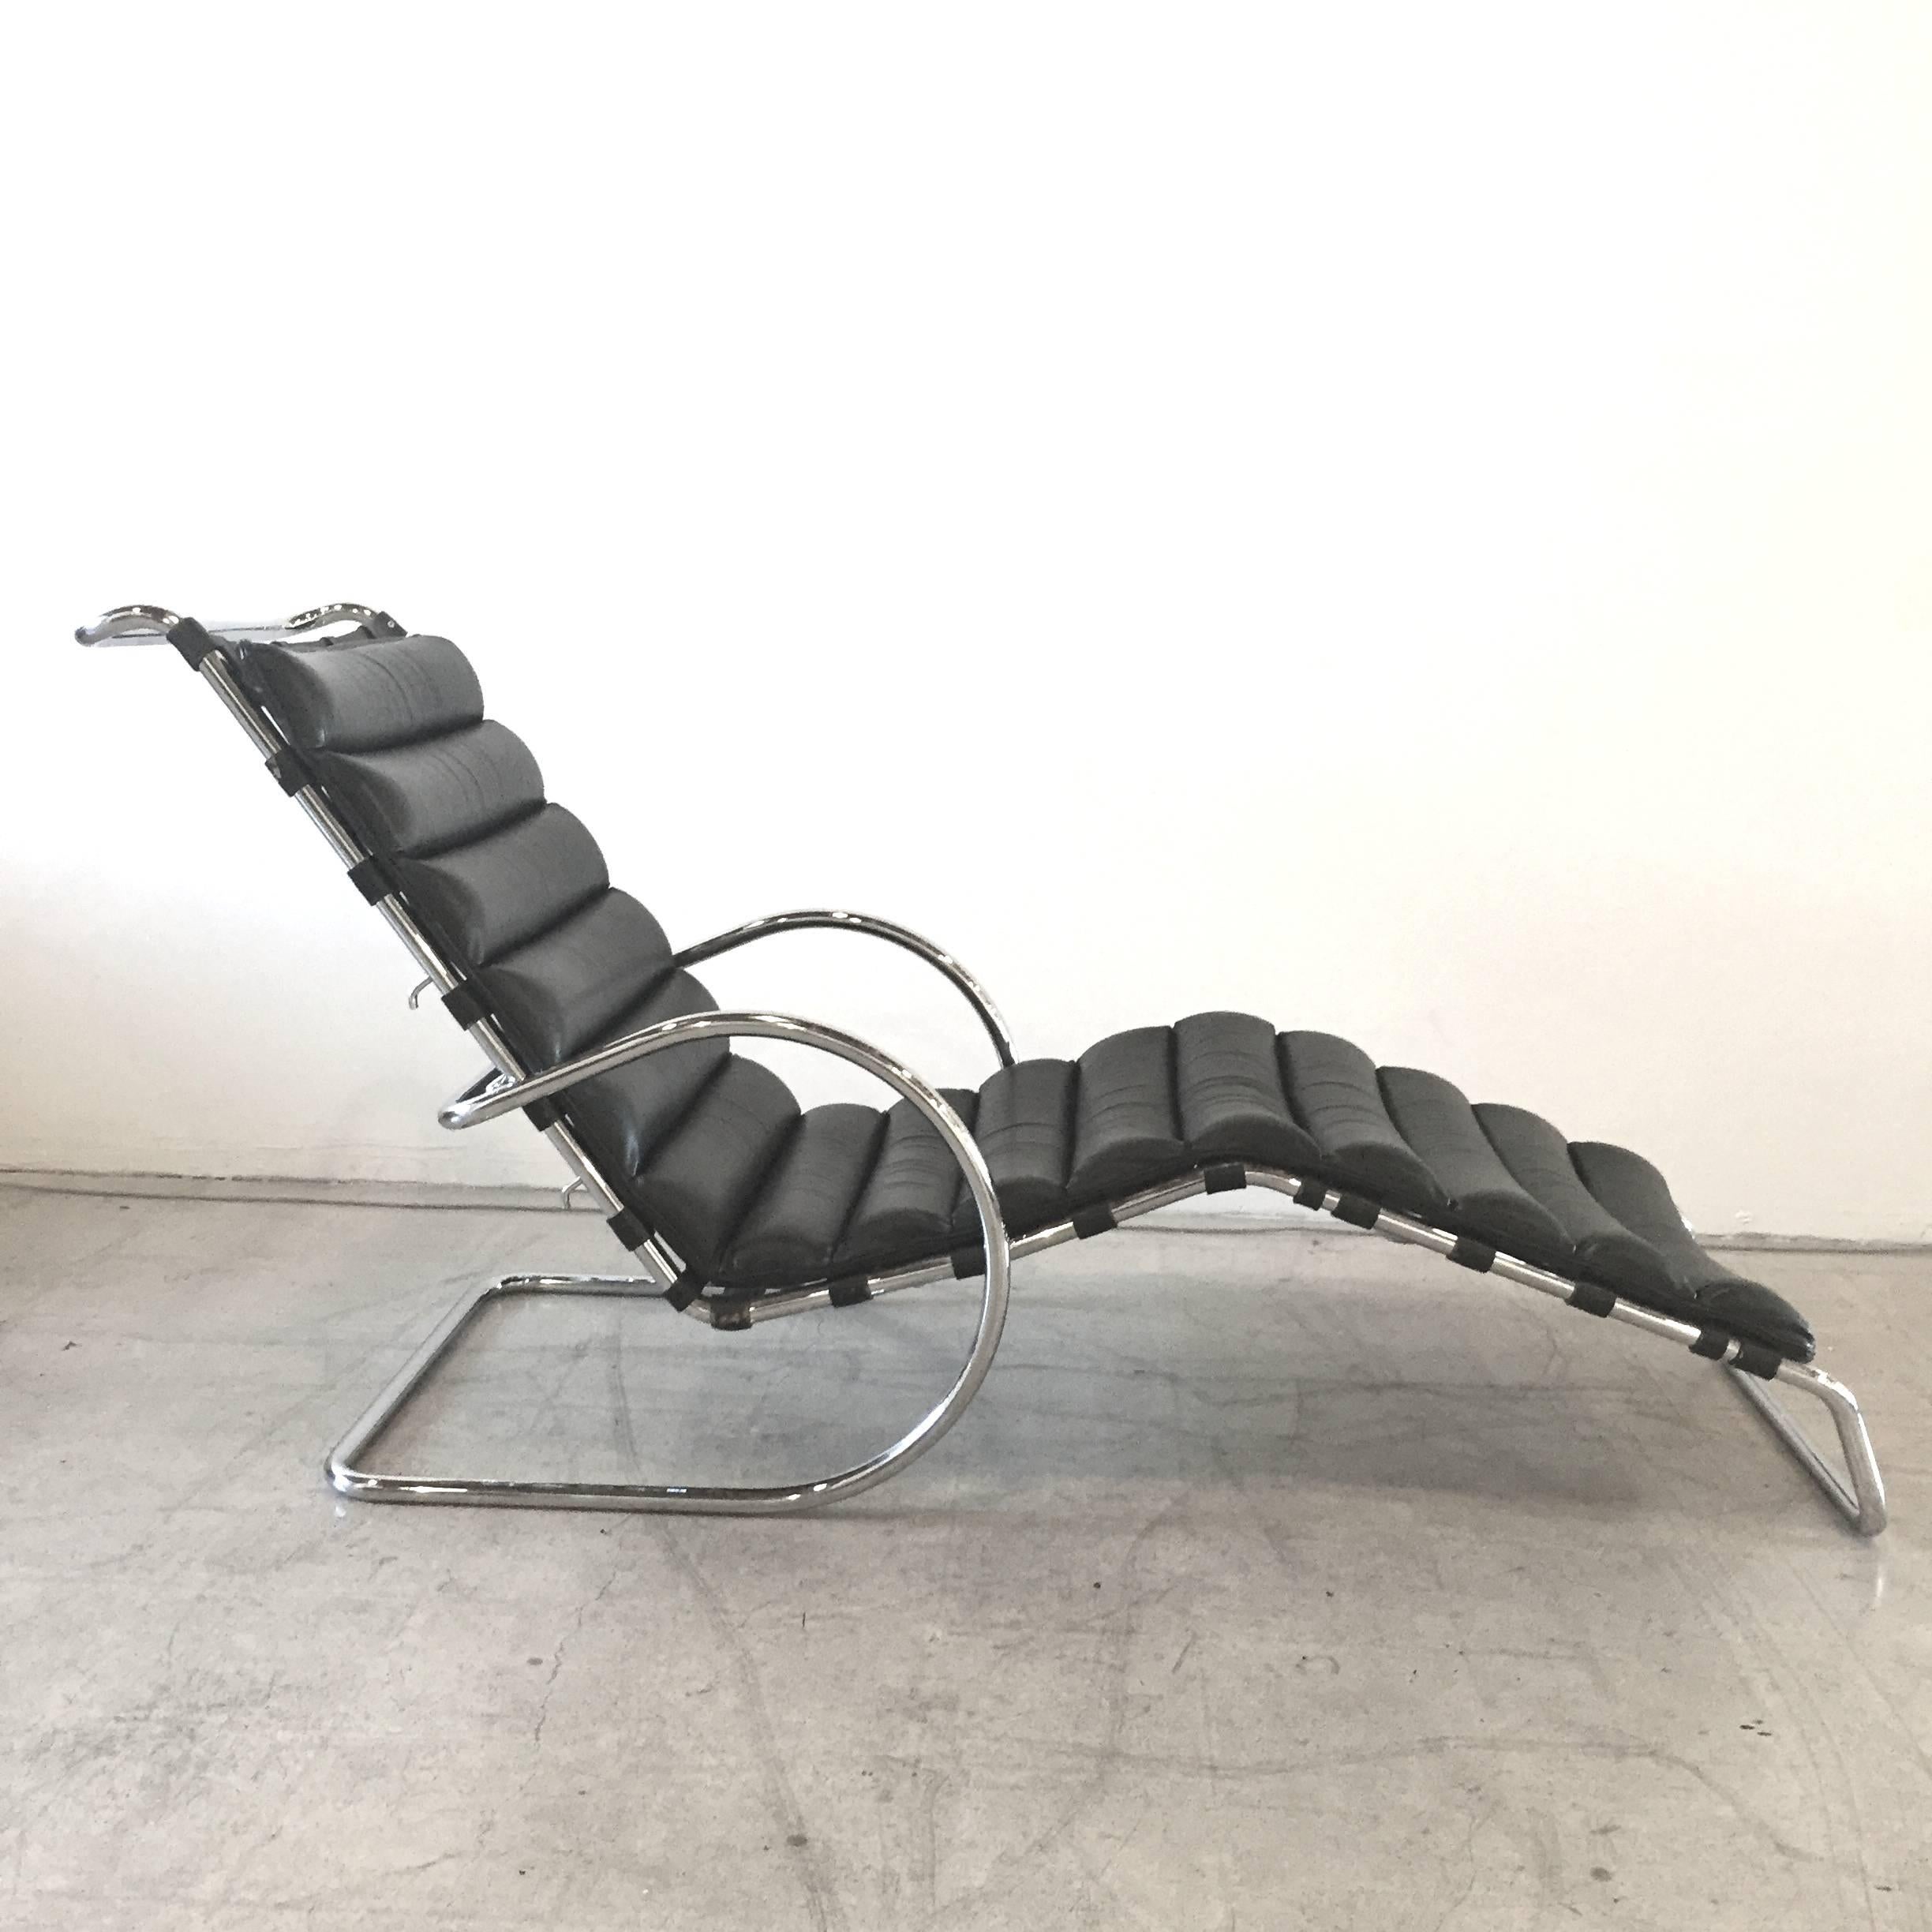 This rare early production MR chaise longue chair by Ludwig Mies van der Rohe is showcased in black leather and is in excellent condition for its age. 

This chair can make an entirely empty room feel complete - giving the owner something so